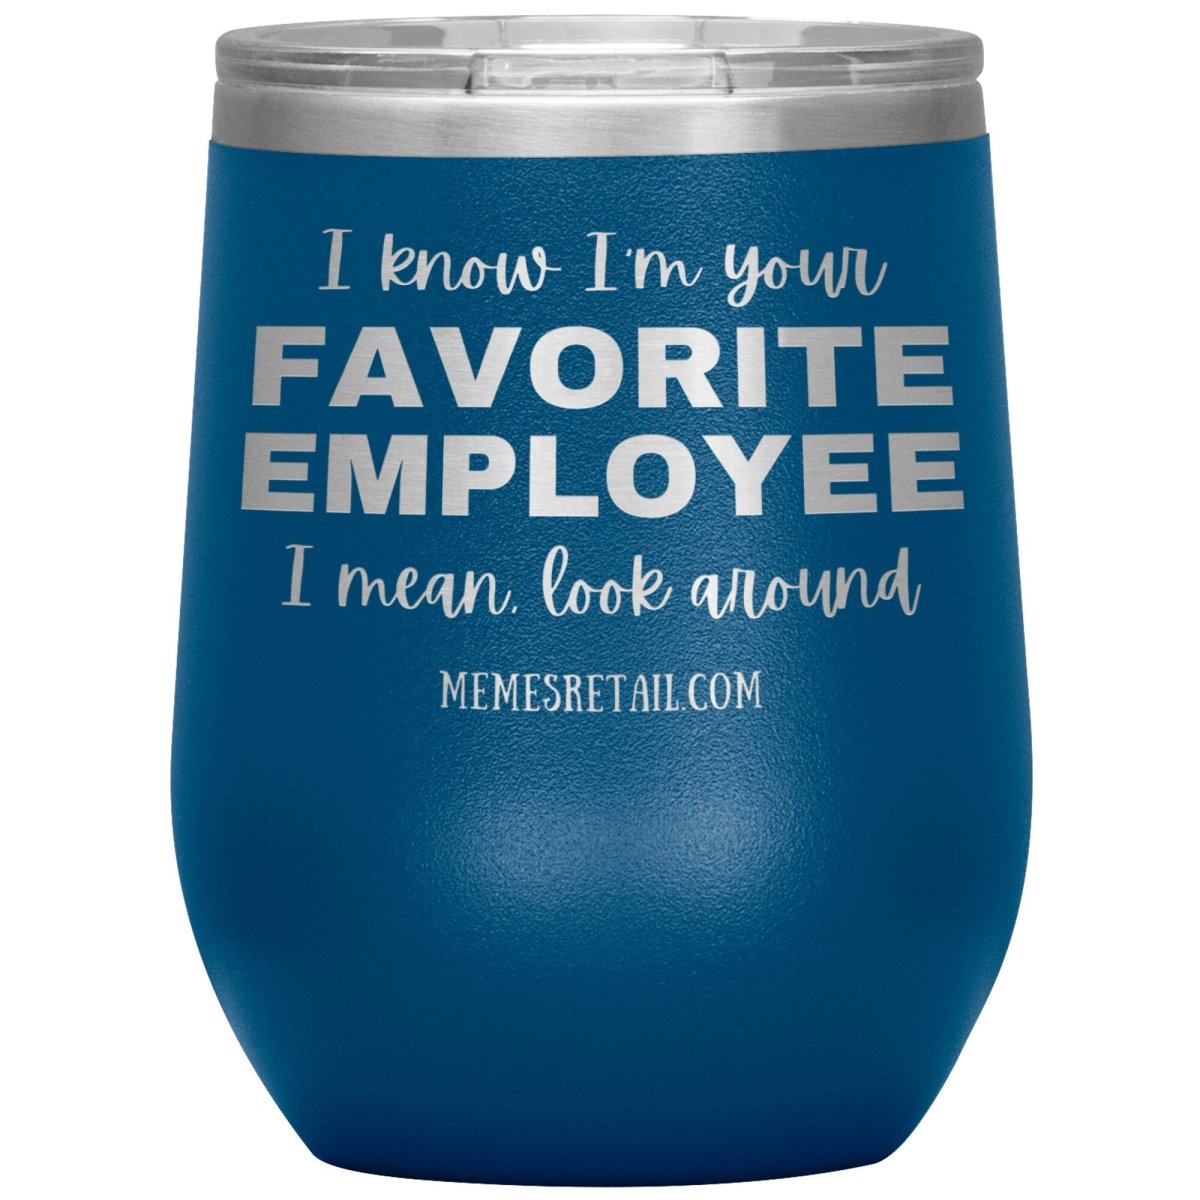 I know I’m your favorite employee, I mean look around, 12oz Wine Insulated Tumbler / Blue - MemesRetail.com